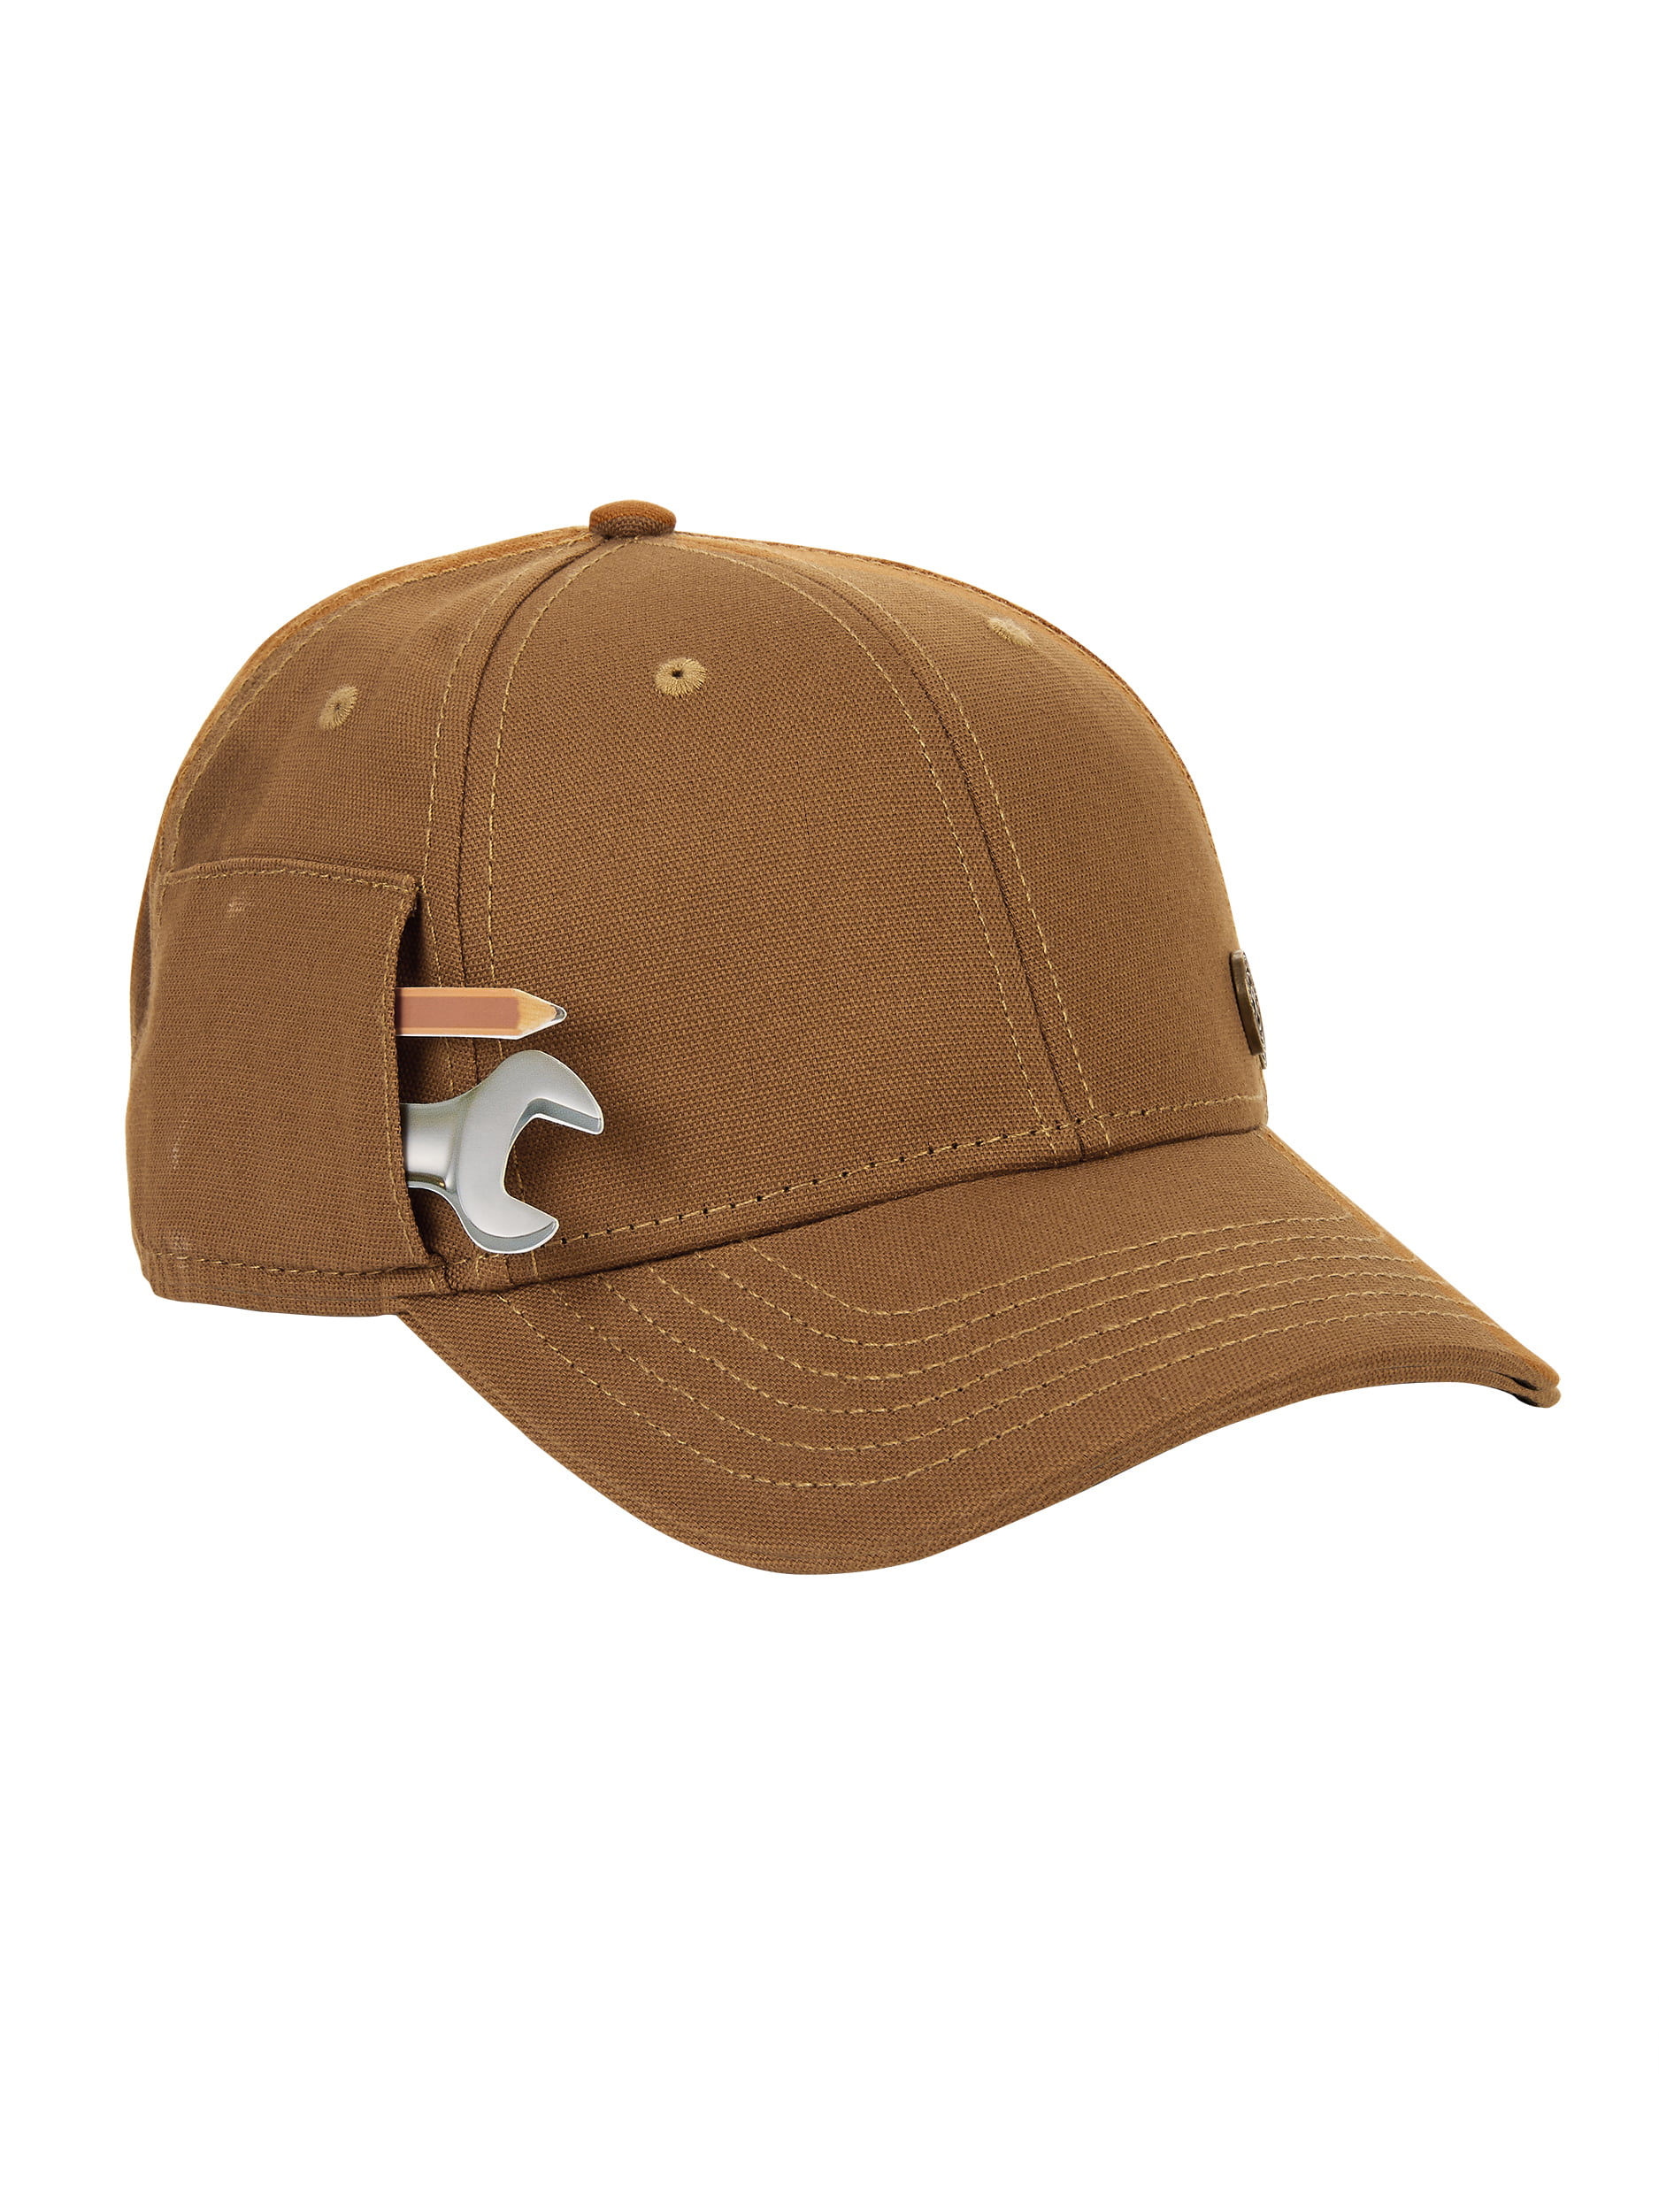 Men's Canvas Utility Cap With Side Pocket and Pre-Curved Bill